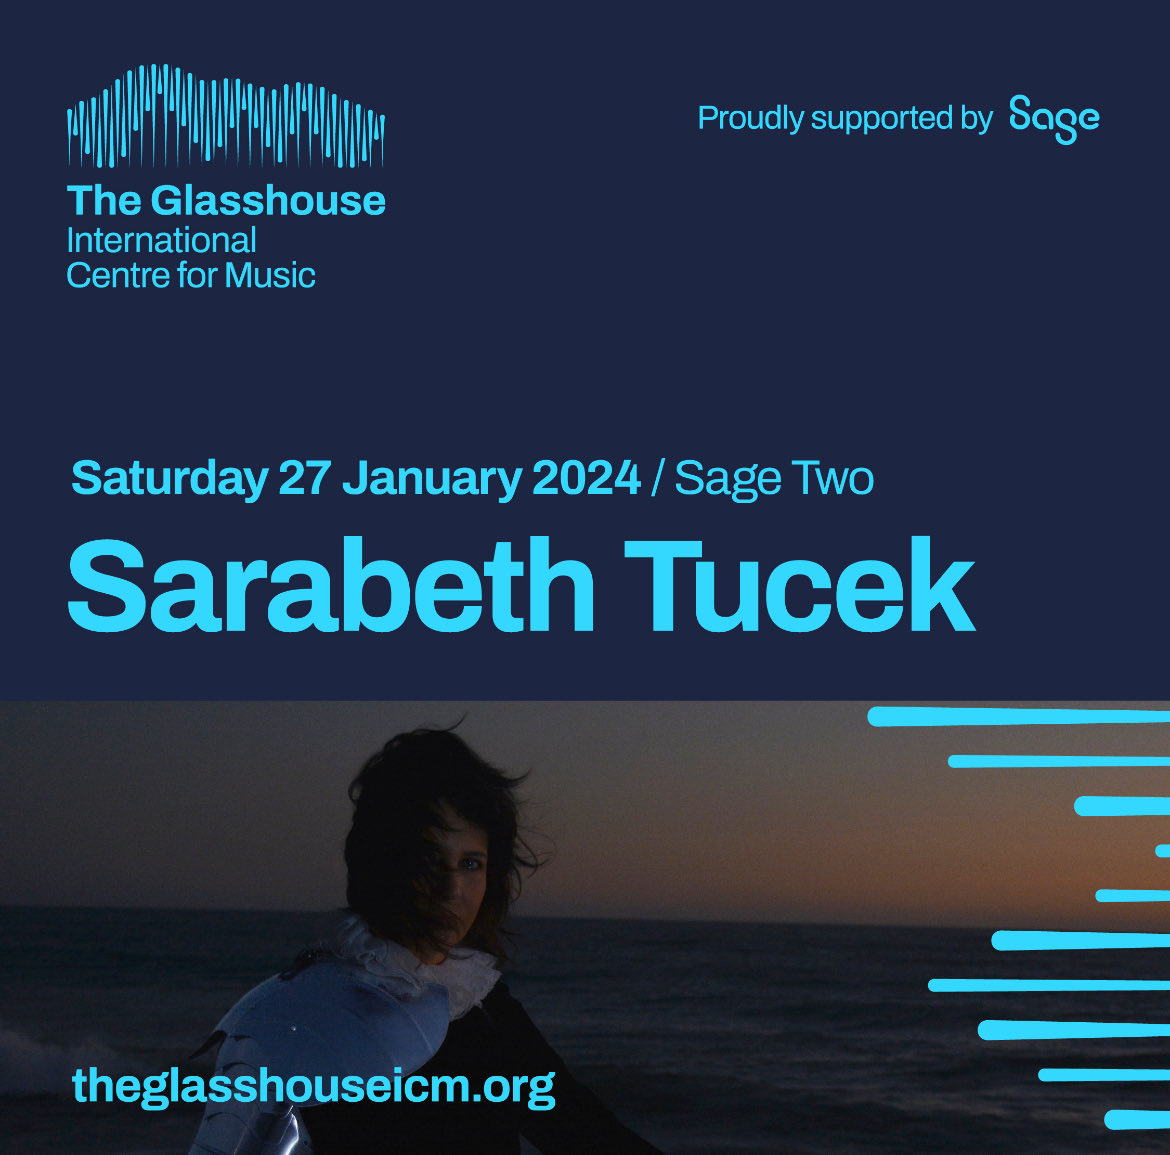 HEY HEY we’re so excited to come to gateshead and play ⁦@glasshouseicm⁩ + sad that it’s our final “joan of all” date! ⁦@toriawooff⁩ will open the show. tix still left : songkick.com/concerts/41426…